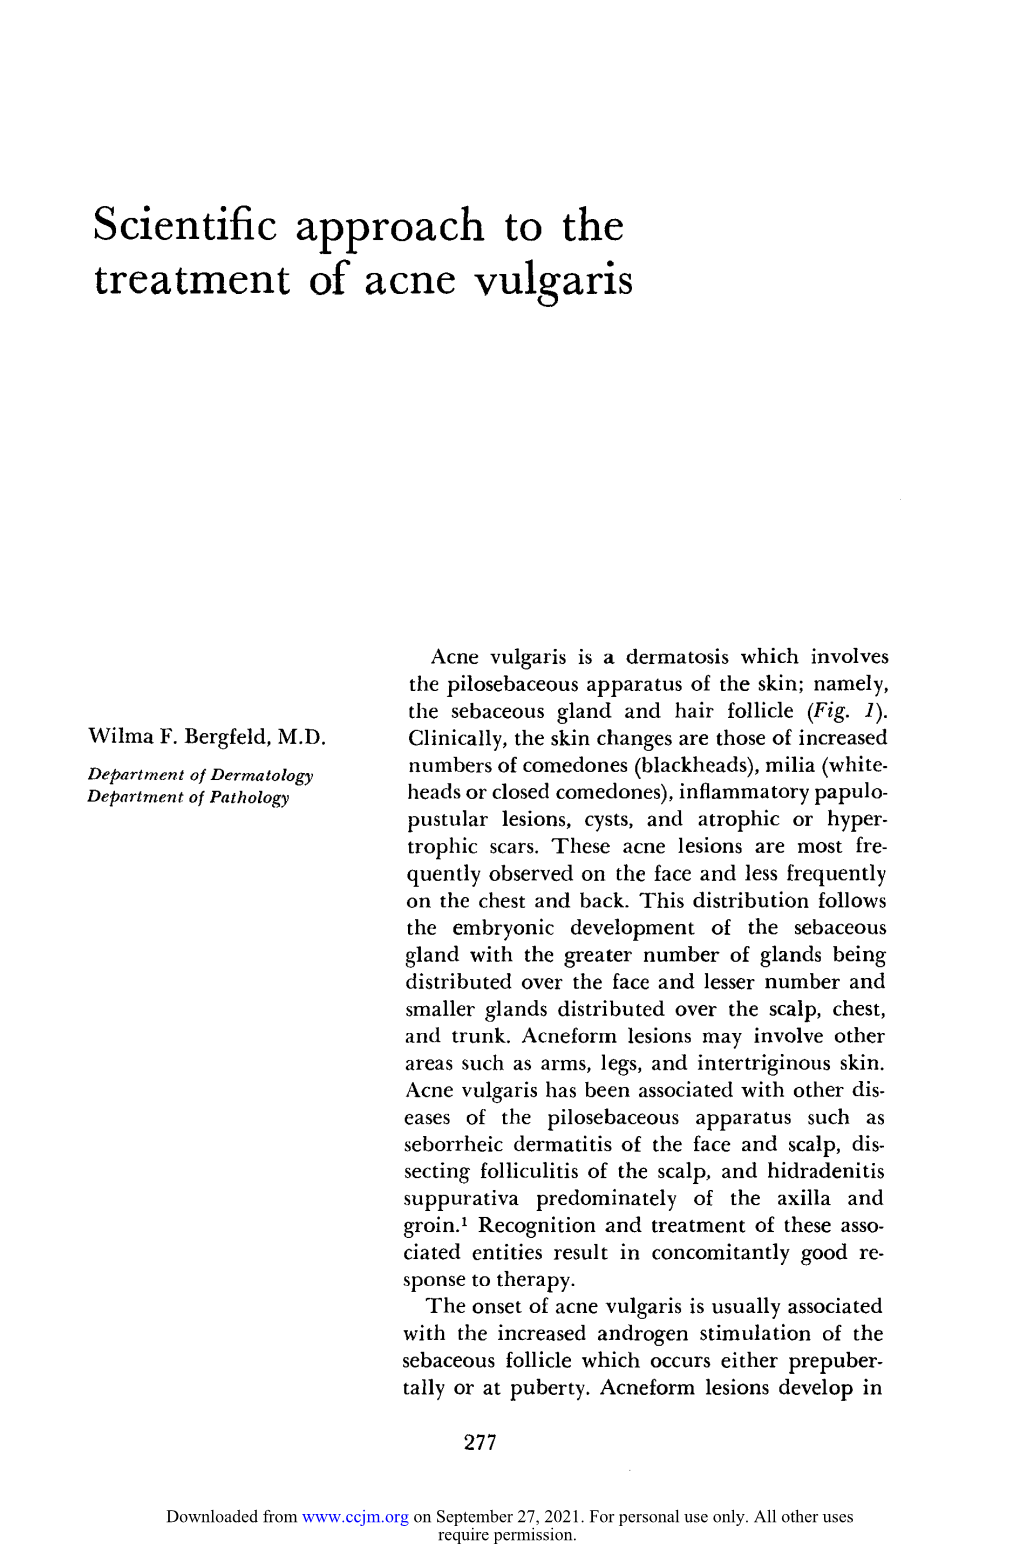 Scientific Approach to the Treatment of Acne Vulgaris